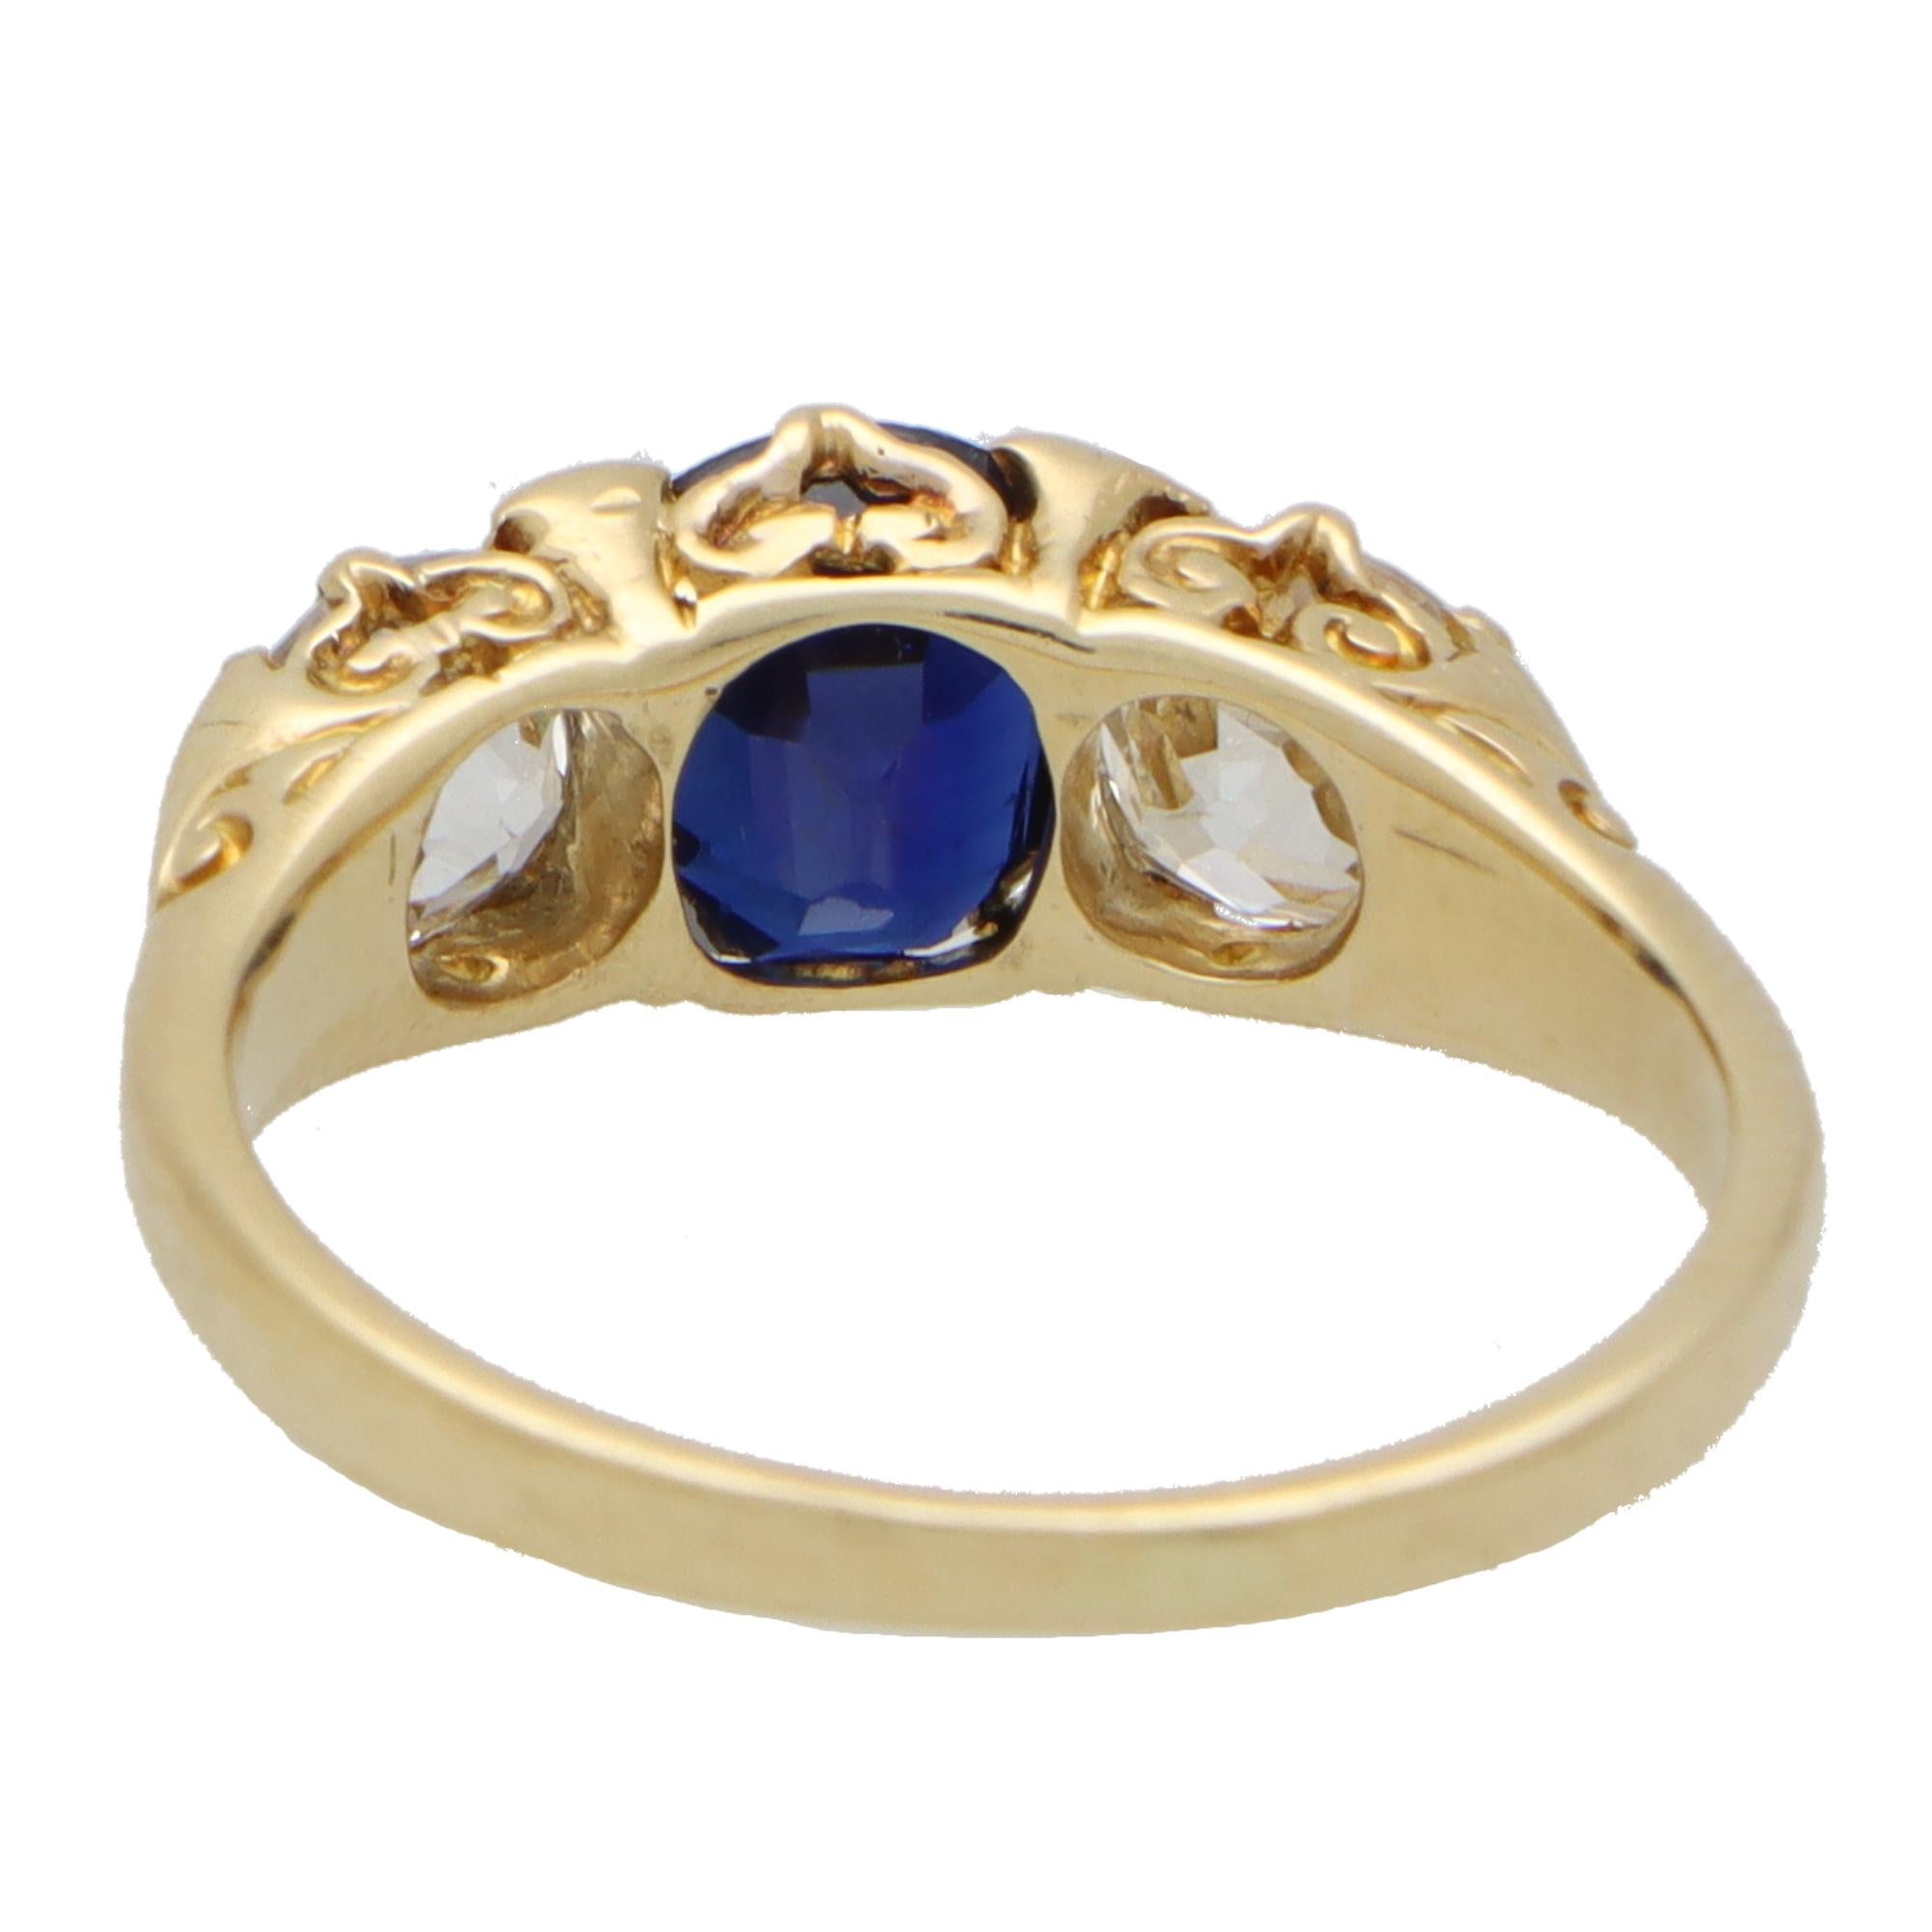 Late Victorian Old Cut Diamond and Sapphire Three-Stone Ring in 18k Gold 1